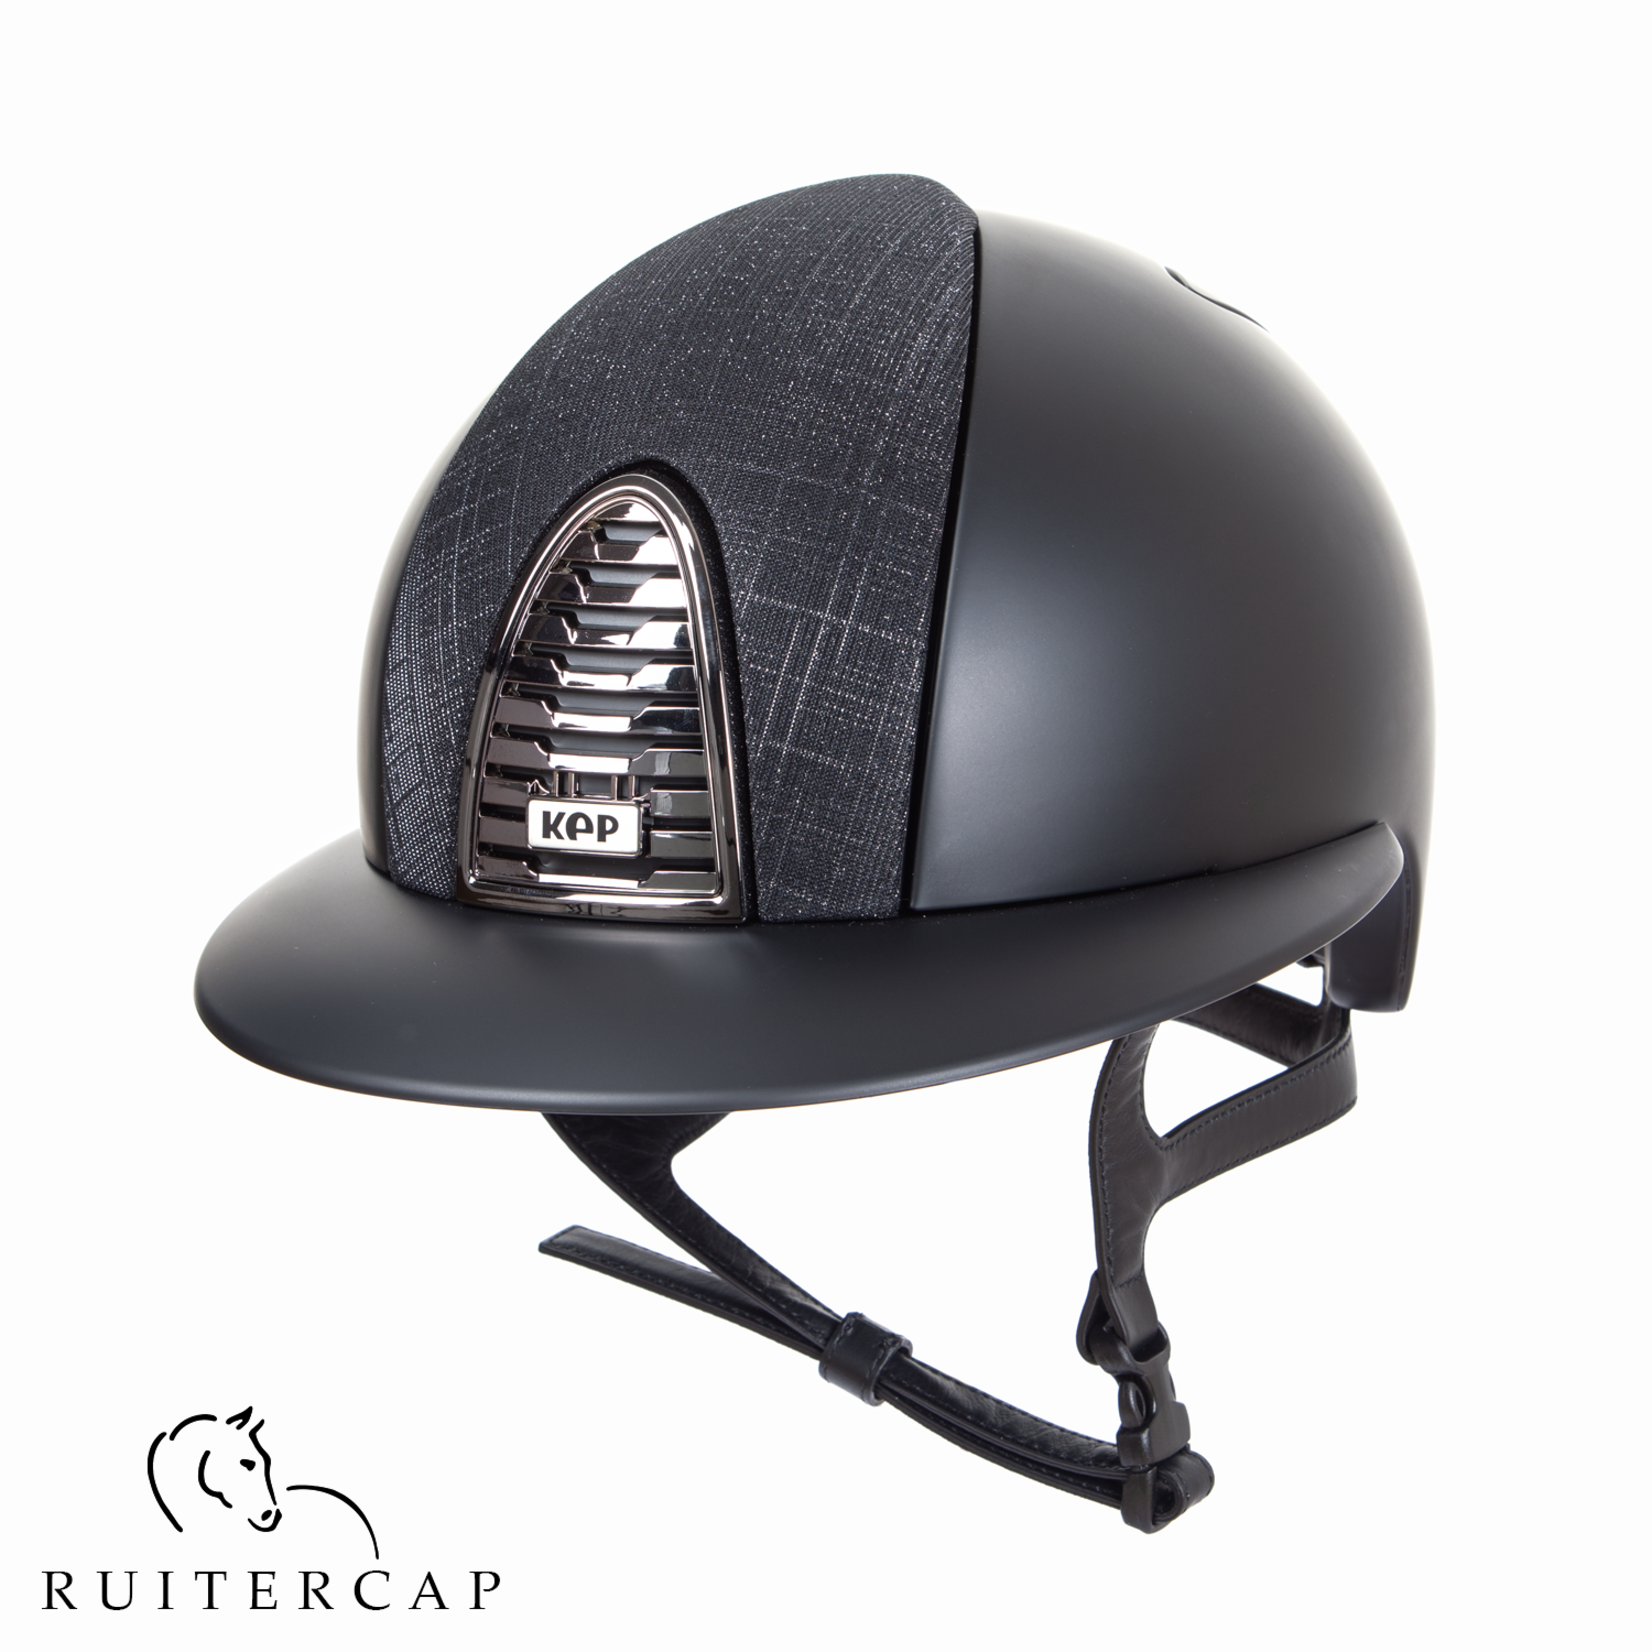 KEP Italia textile black with galassia black front - polo visor - mirror black frame and grill